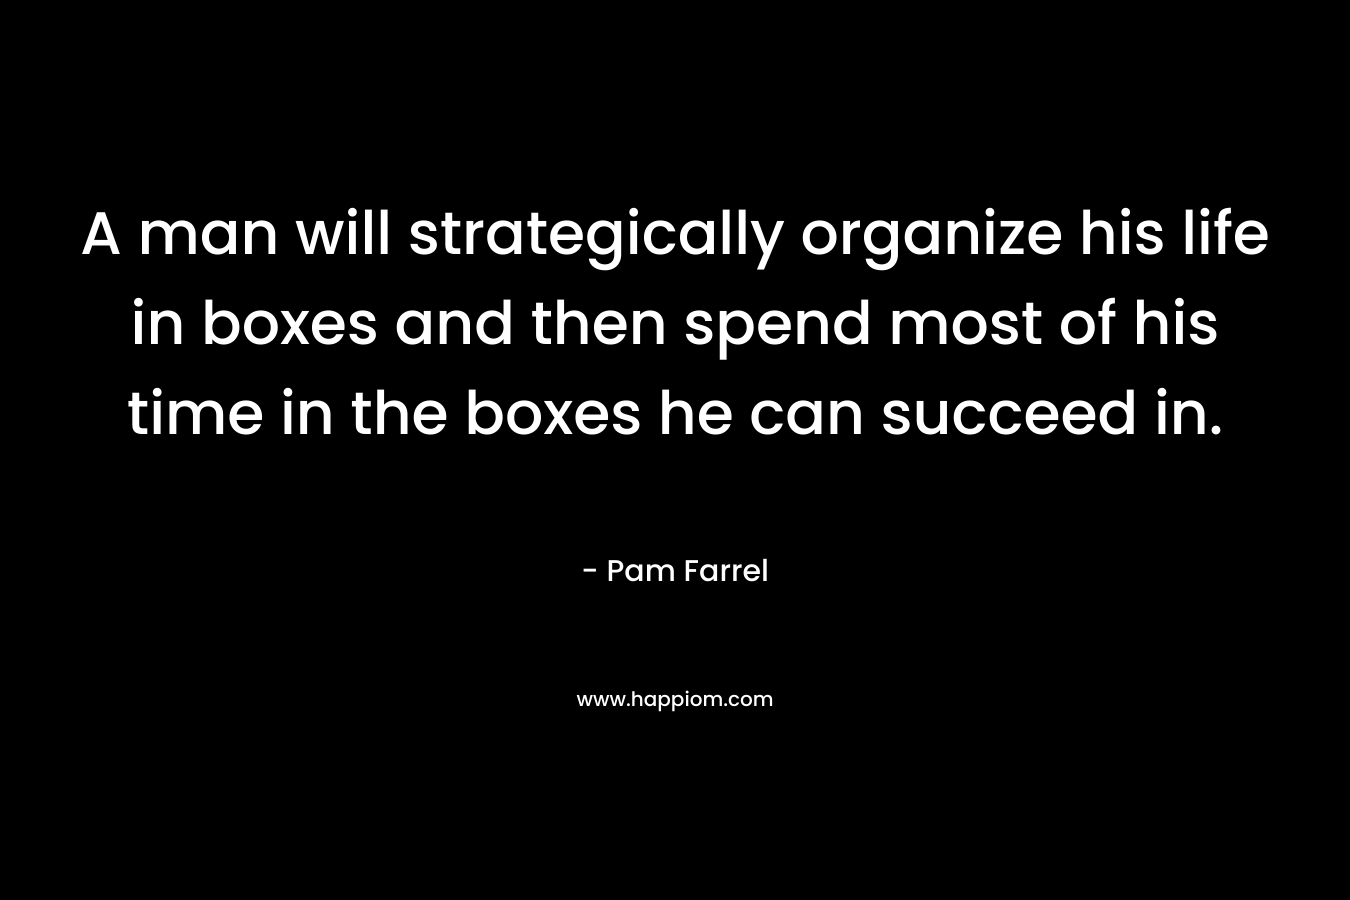 A man will strategically organize his life in boxes and then spend most of his time in the boxes he can succeed in.